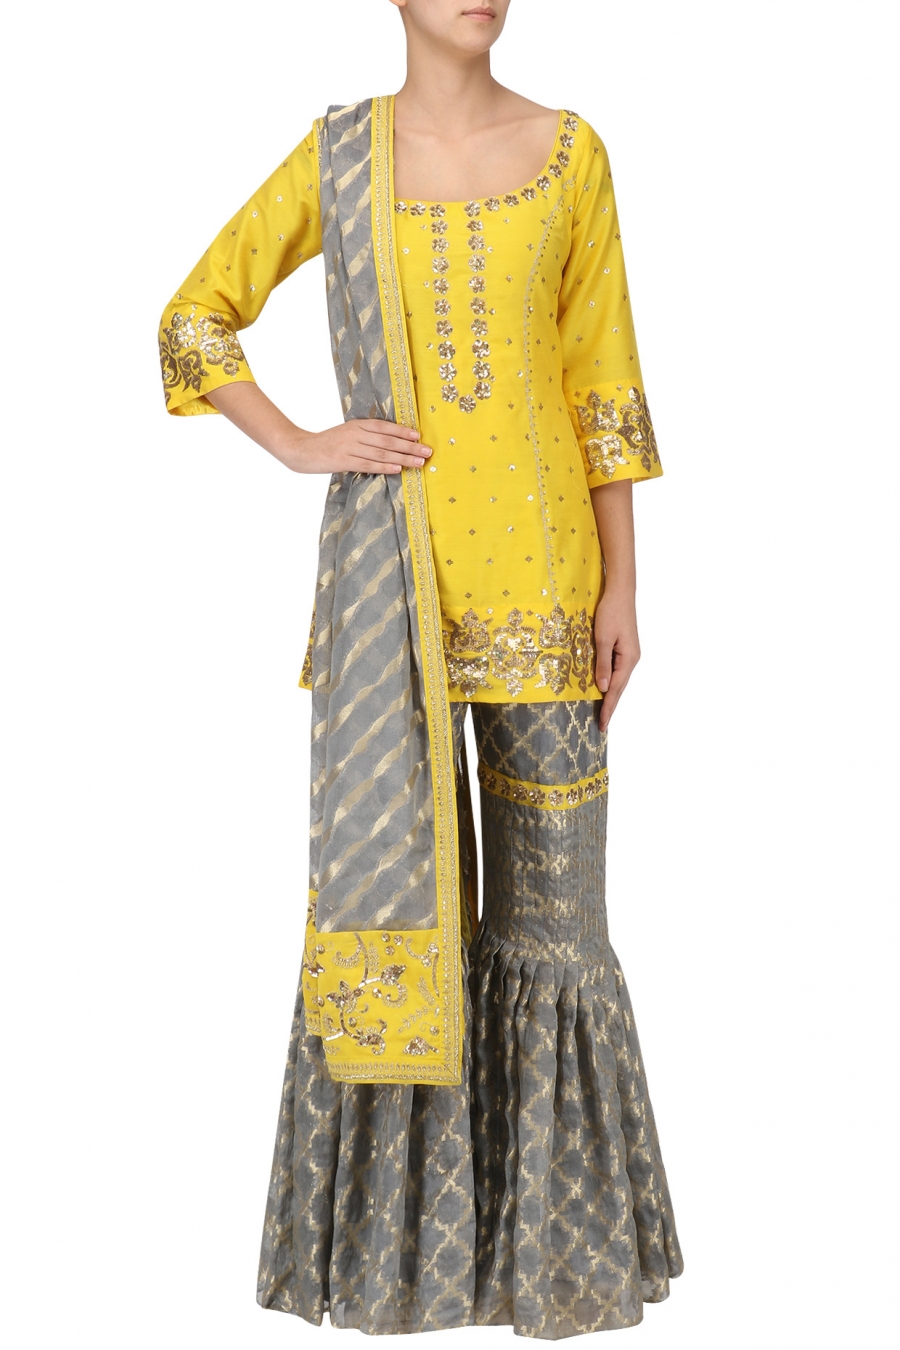 Buy Yellow And Gray Color Sharara Suit Online on Fresh Look Fashion